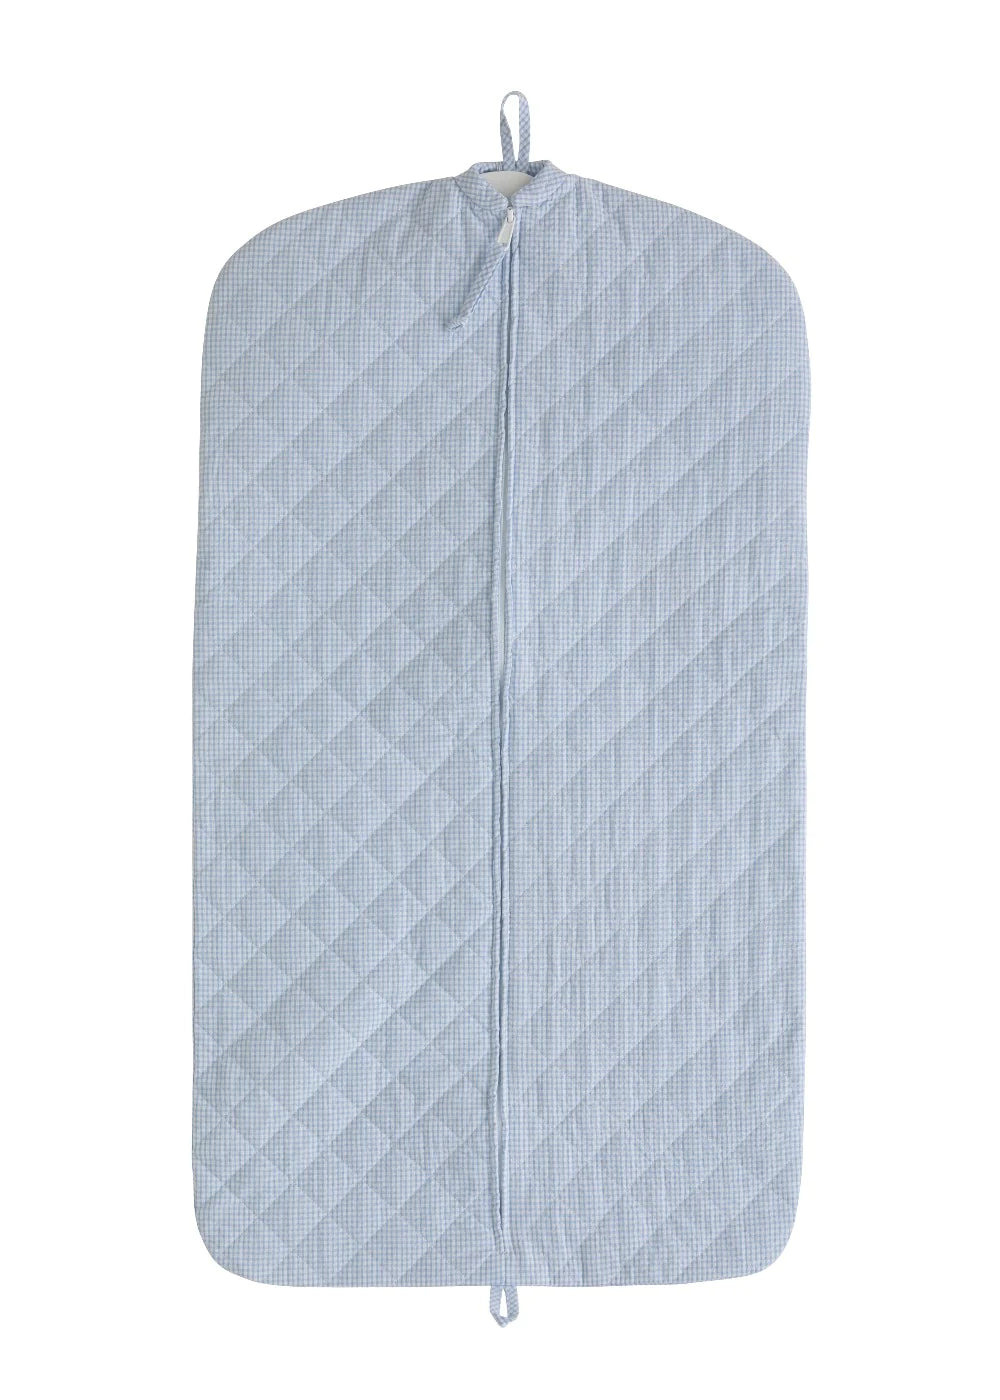 Quilted Luggage Garment Bag in Lt. Blue